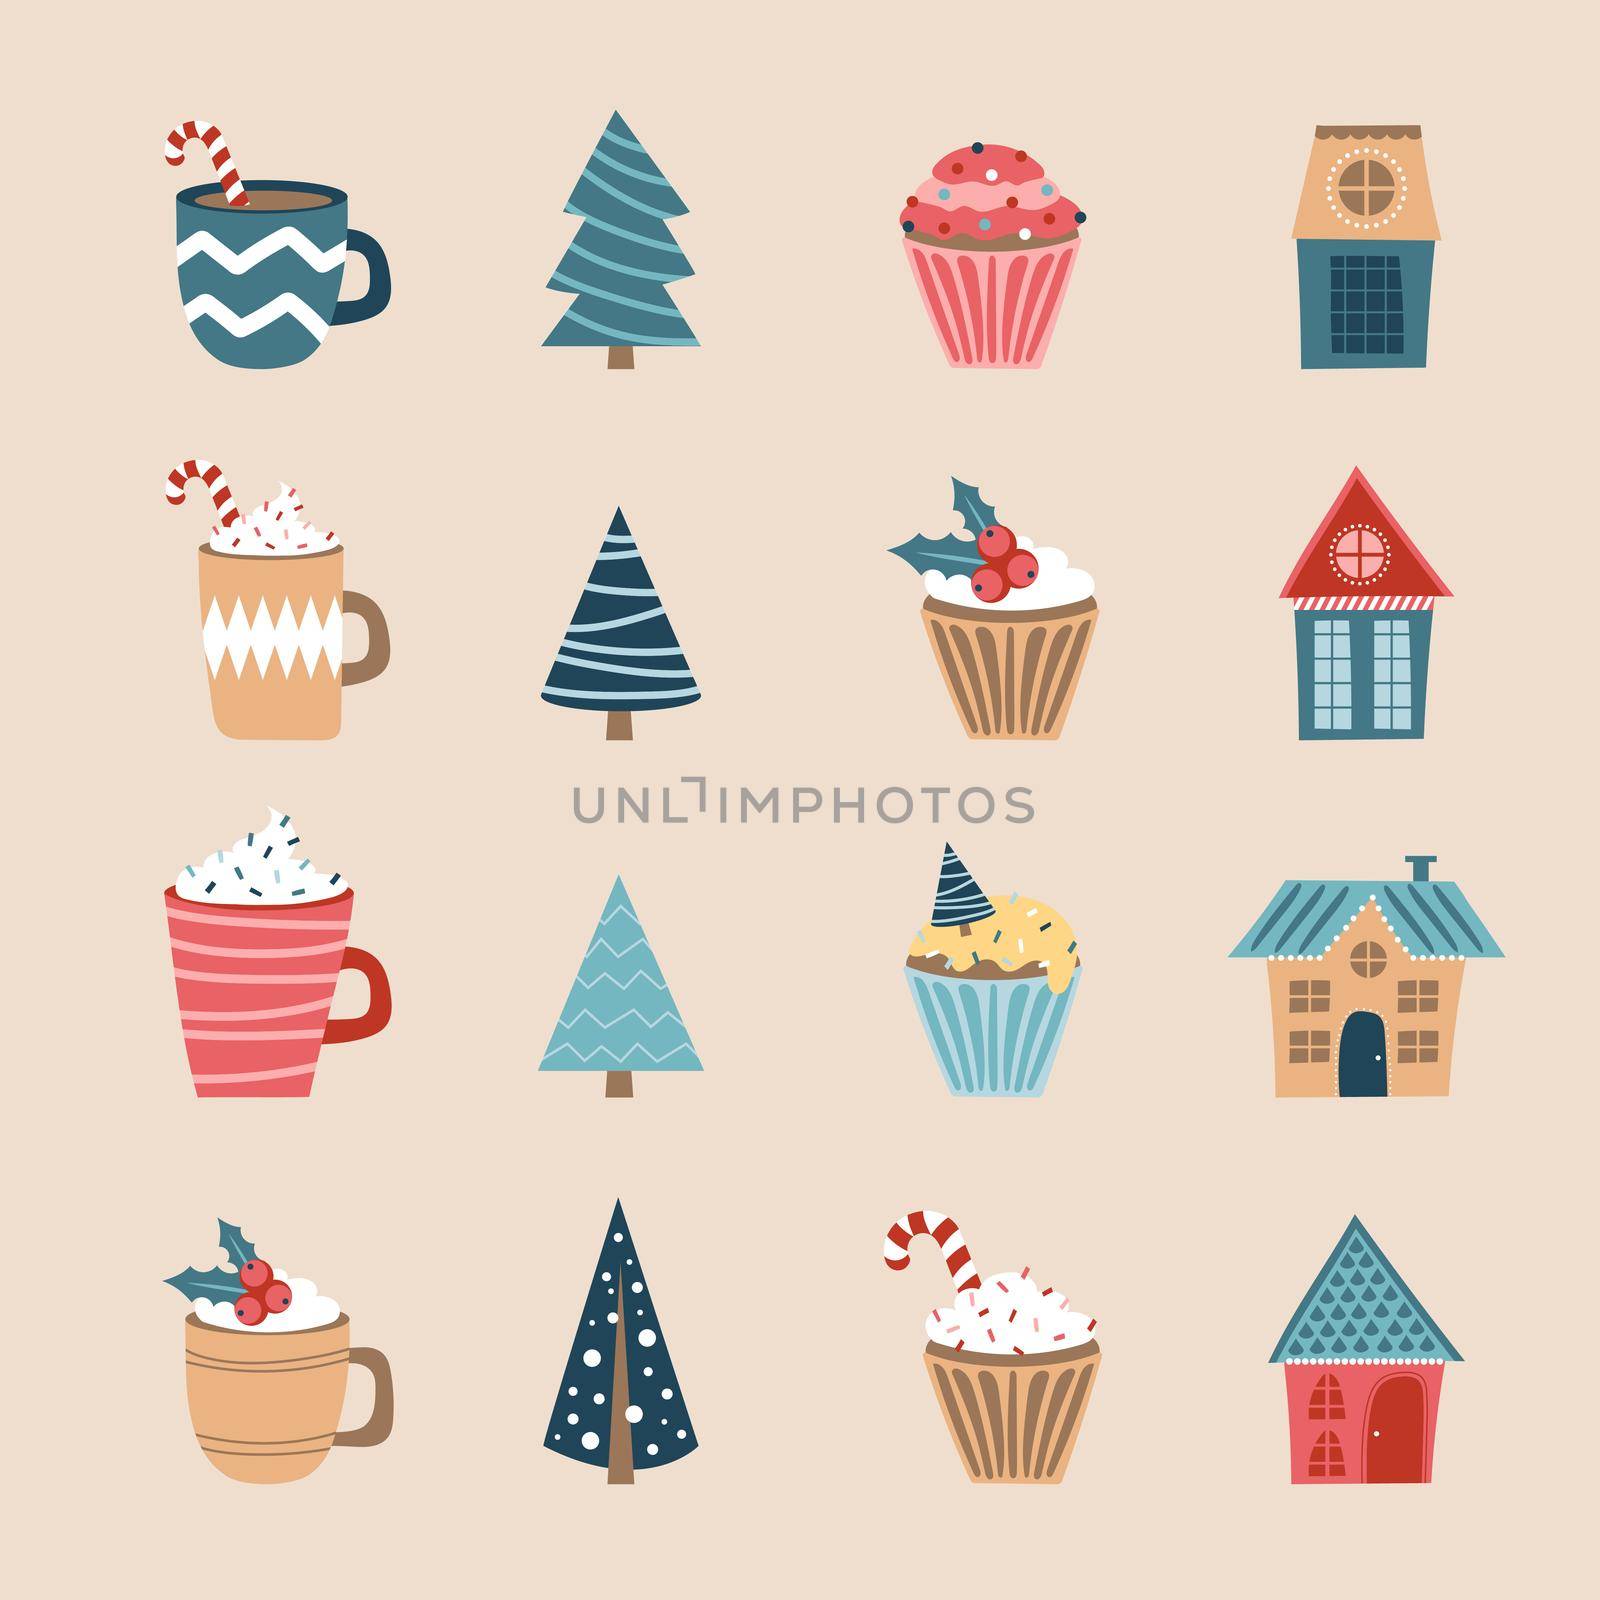 Merry Christmas icon set. Holiday icons. Cups, cupcakes, houses and trees by natali_brill